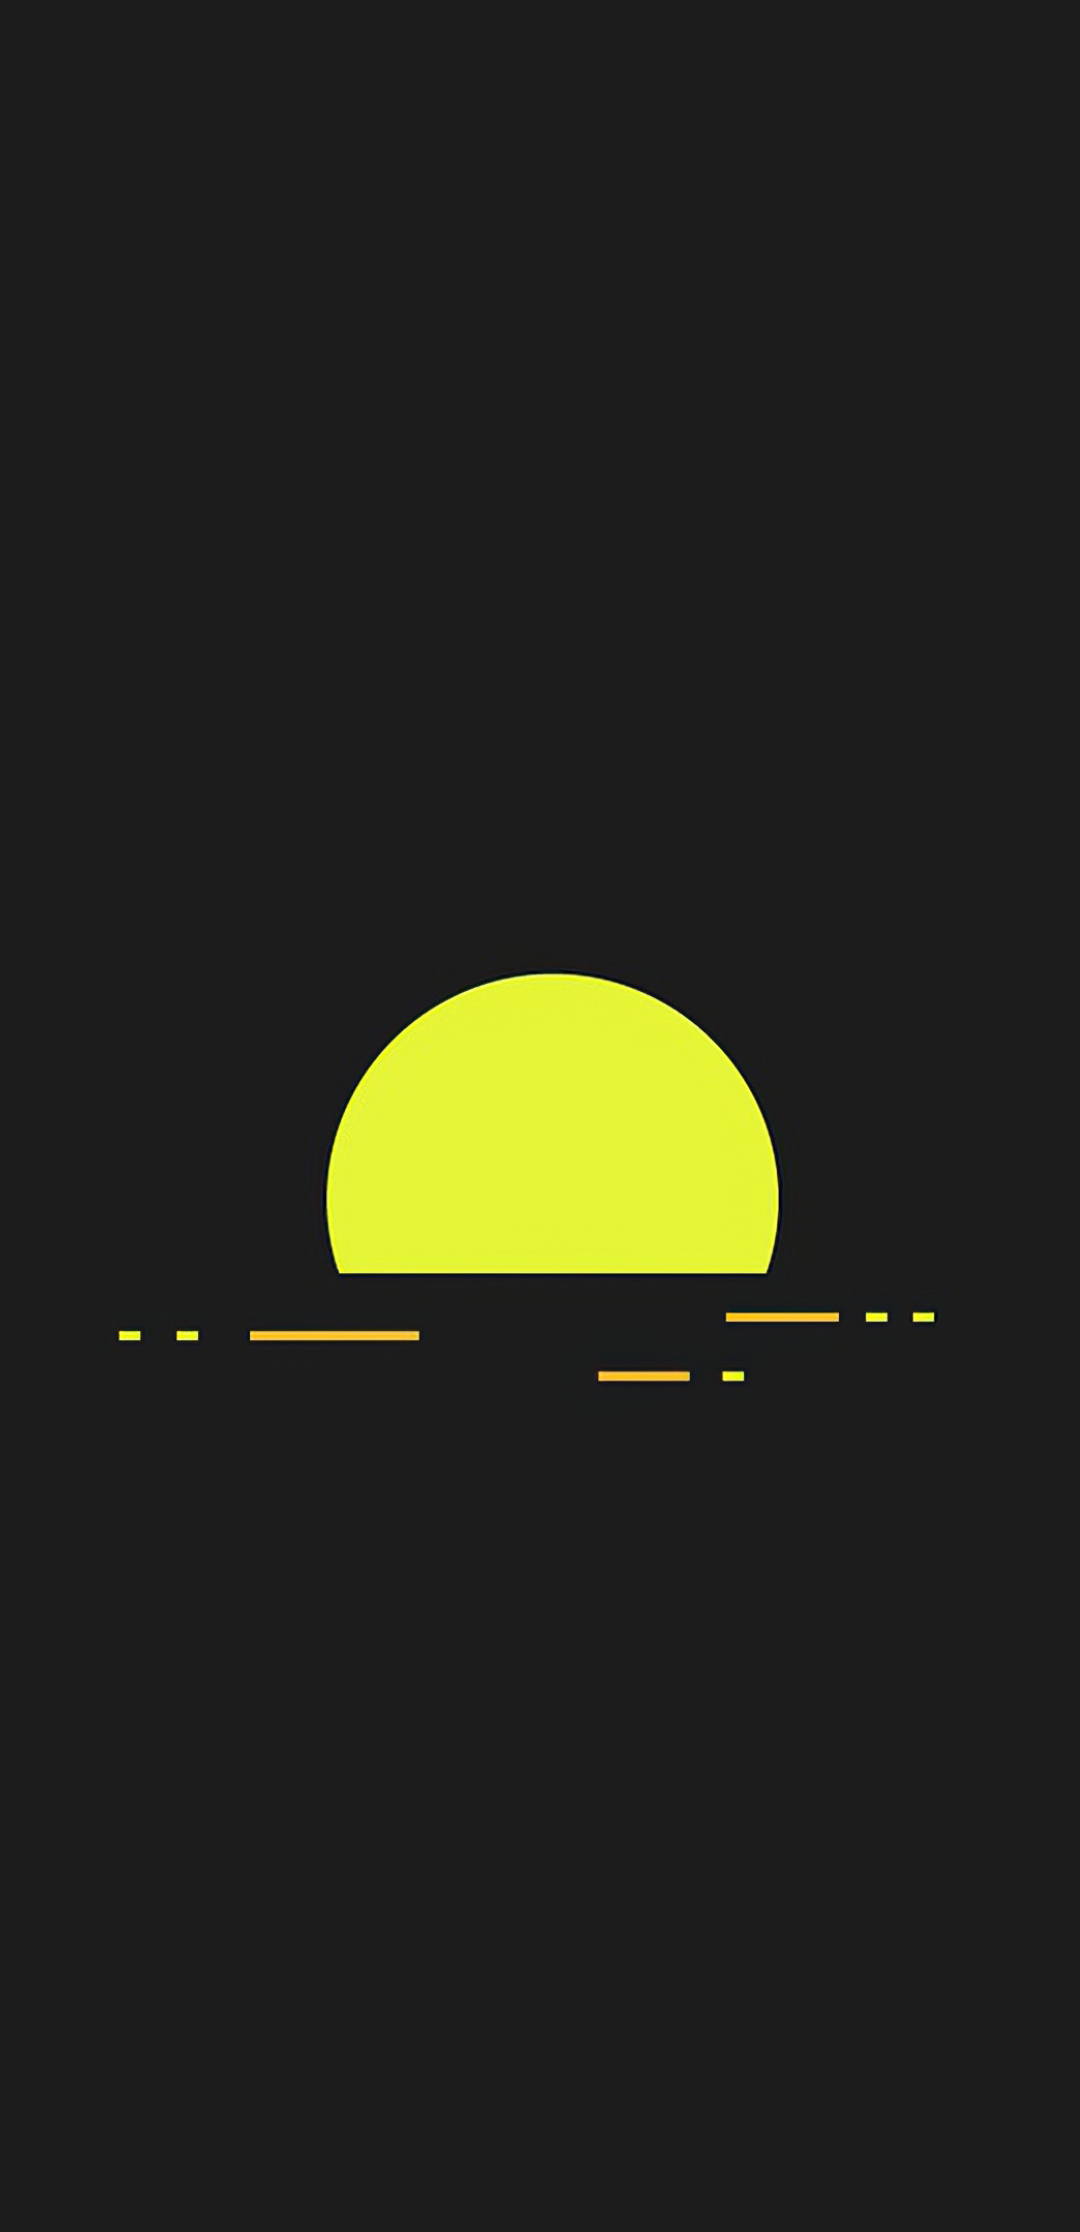 A yellow sunset on a black background - Sun